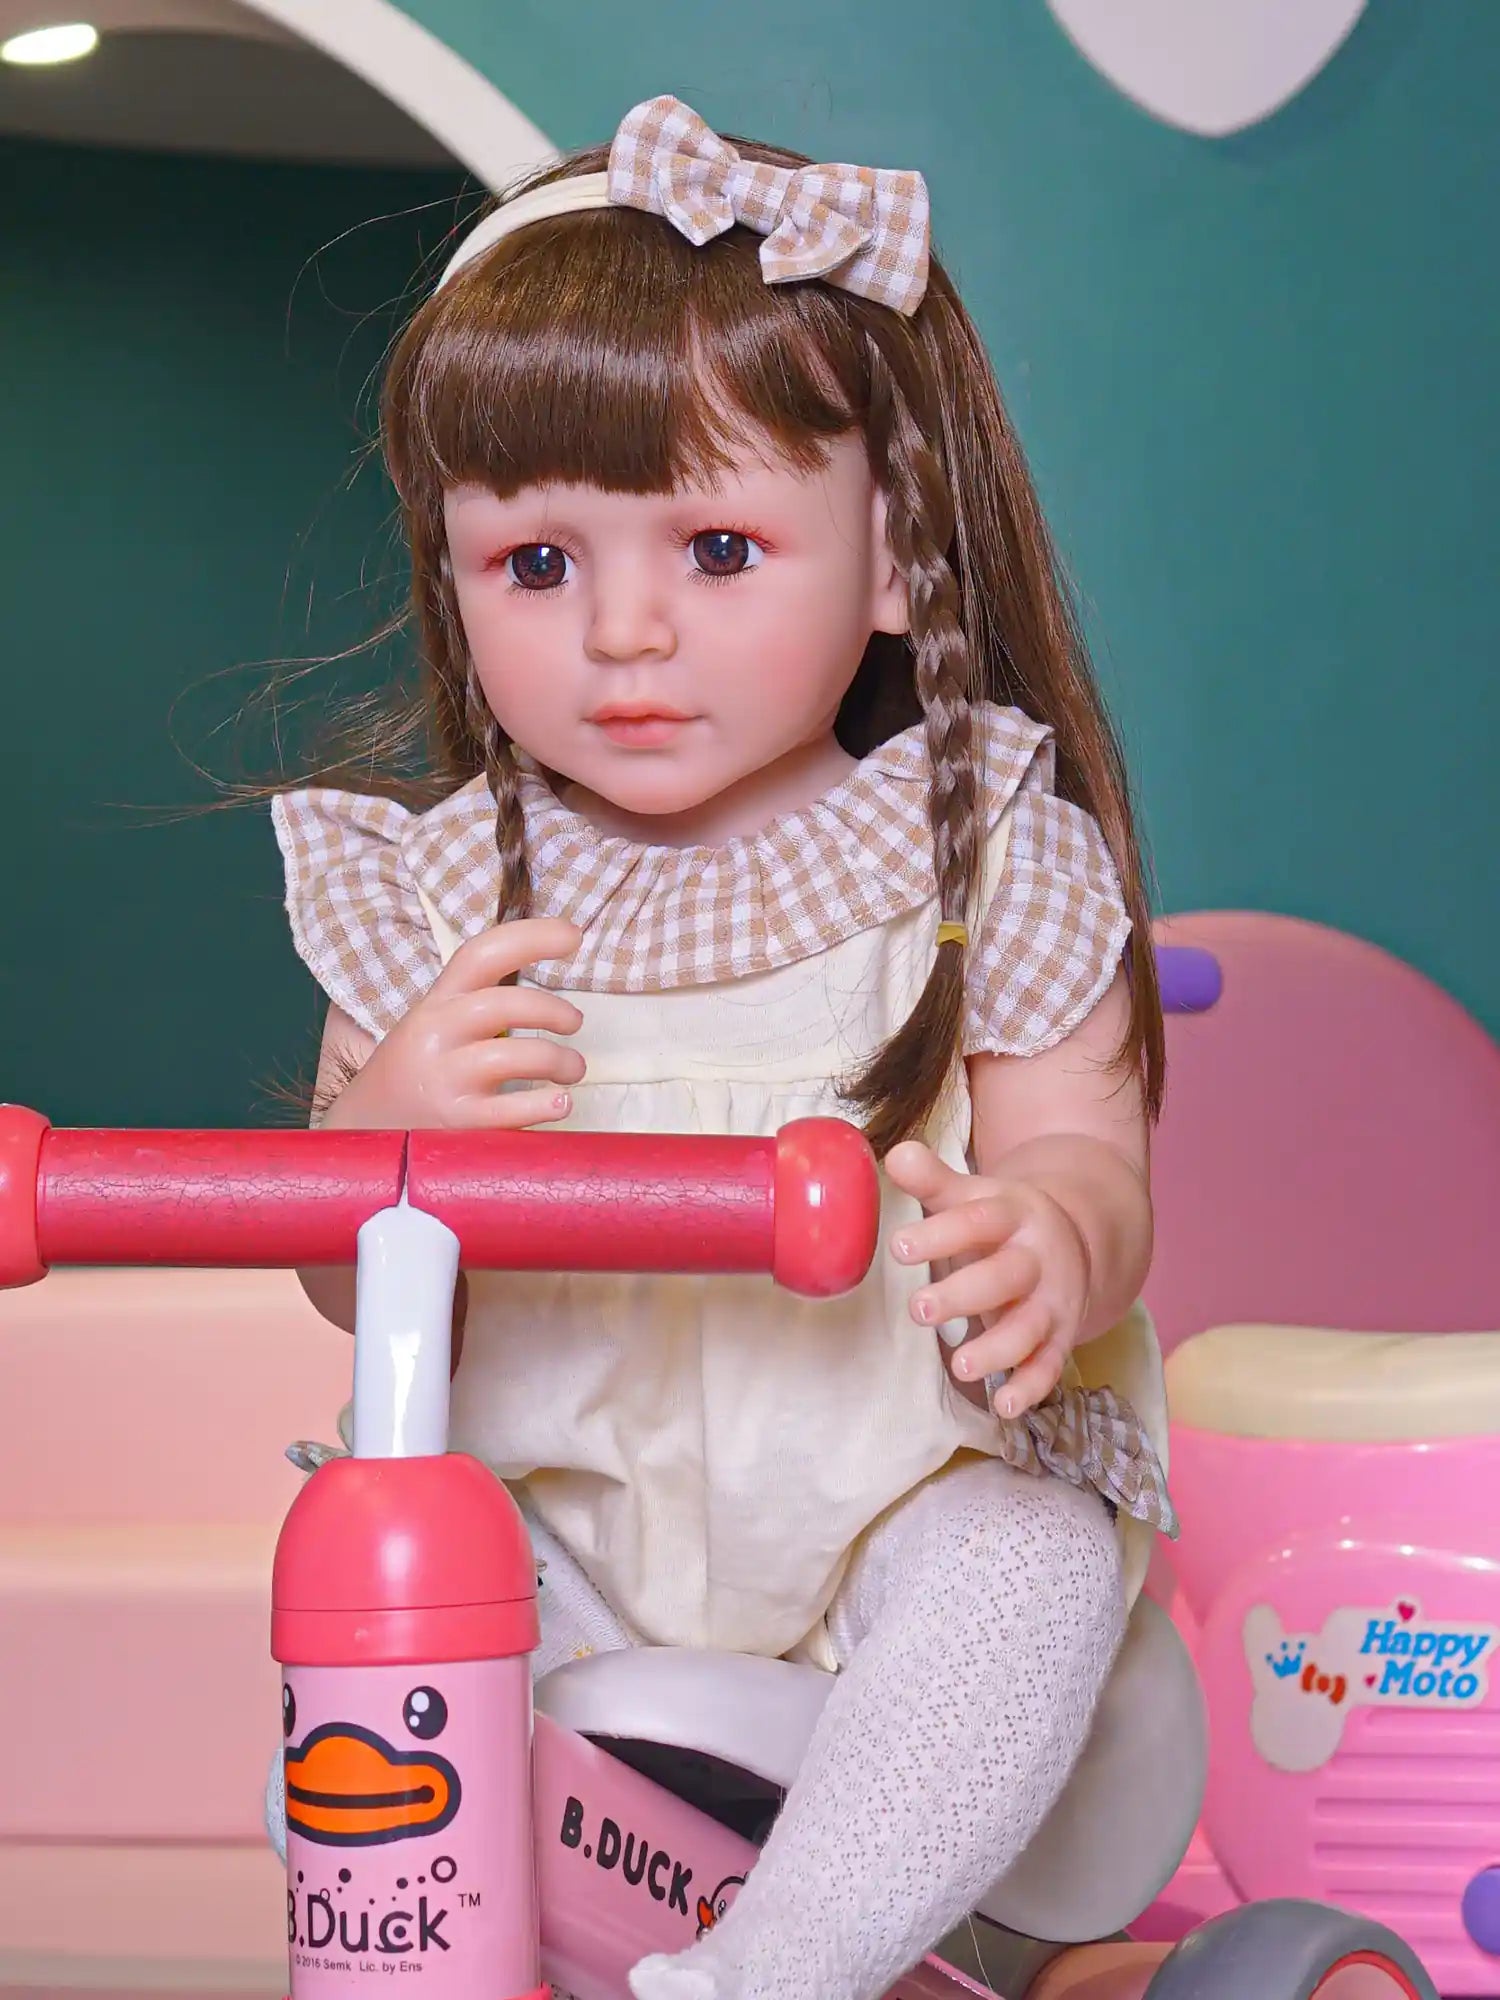 Realistic toddler doll dressed in a cream-colored outfit with white lace tights, seated indoors with toys.